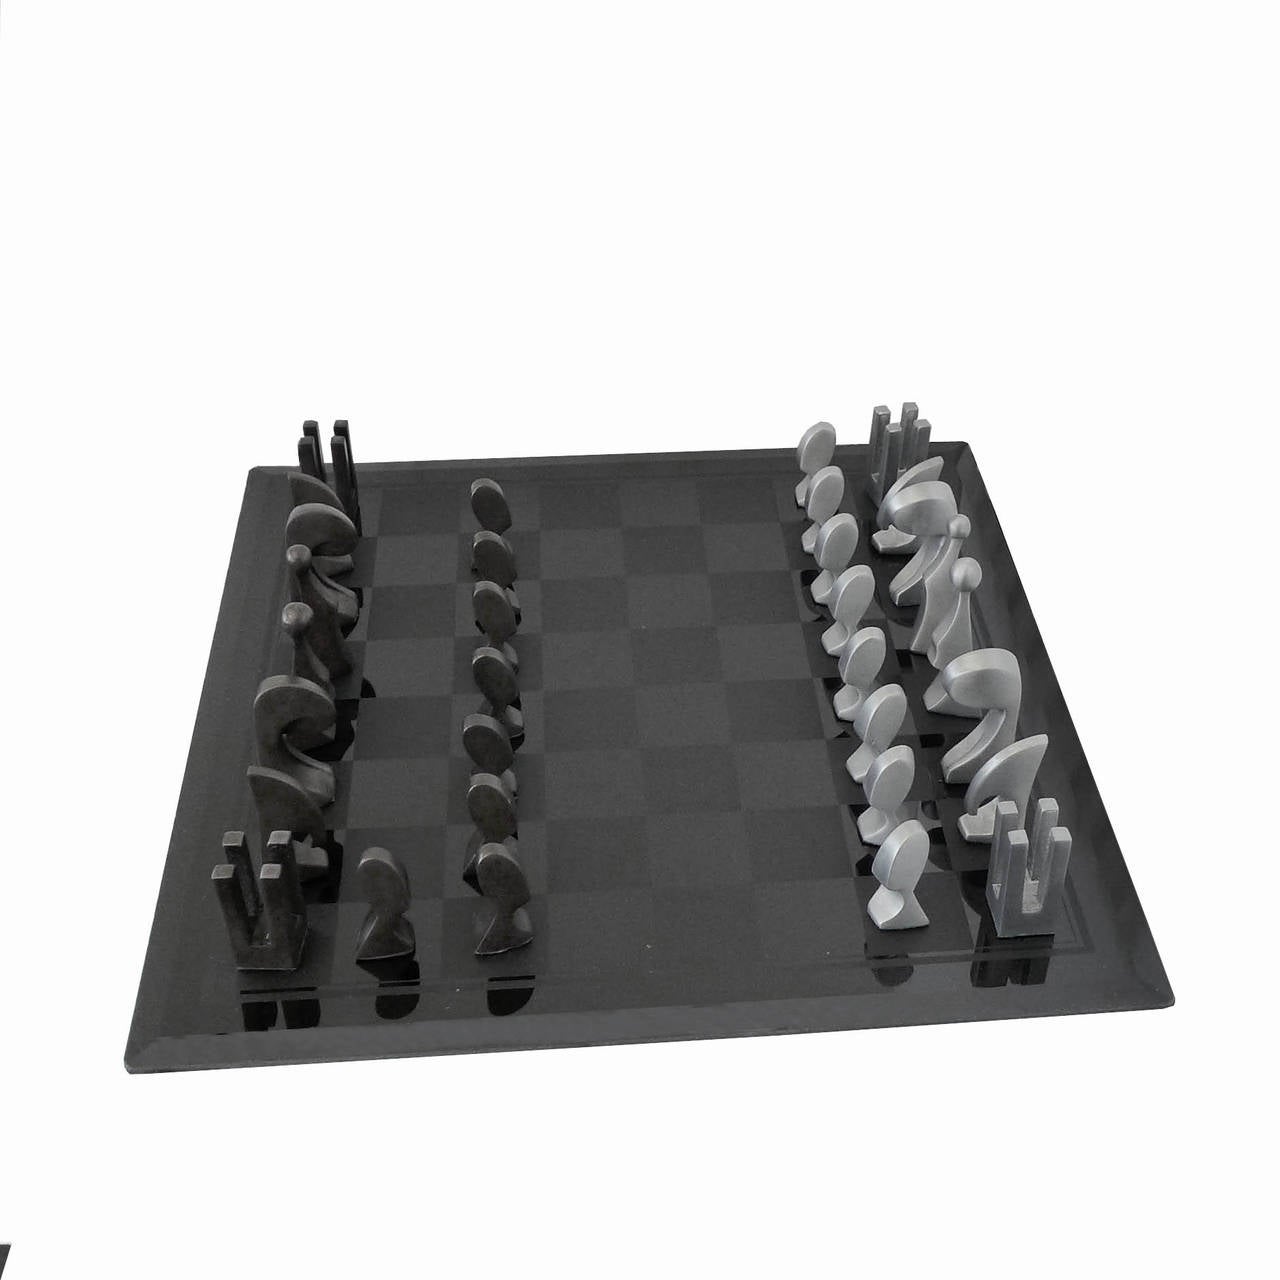 Pierre Cardin, 1969 Evolution Chess Set with Glass Board In Excellent Condition For Sale In Los Angeles, CA